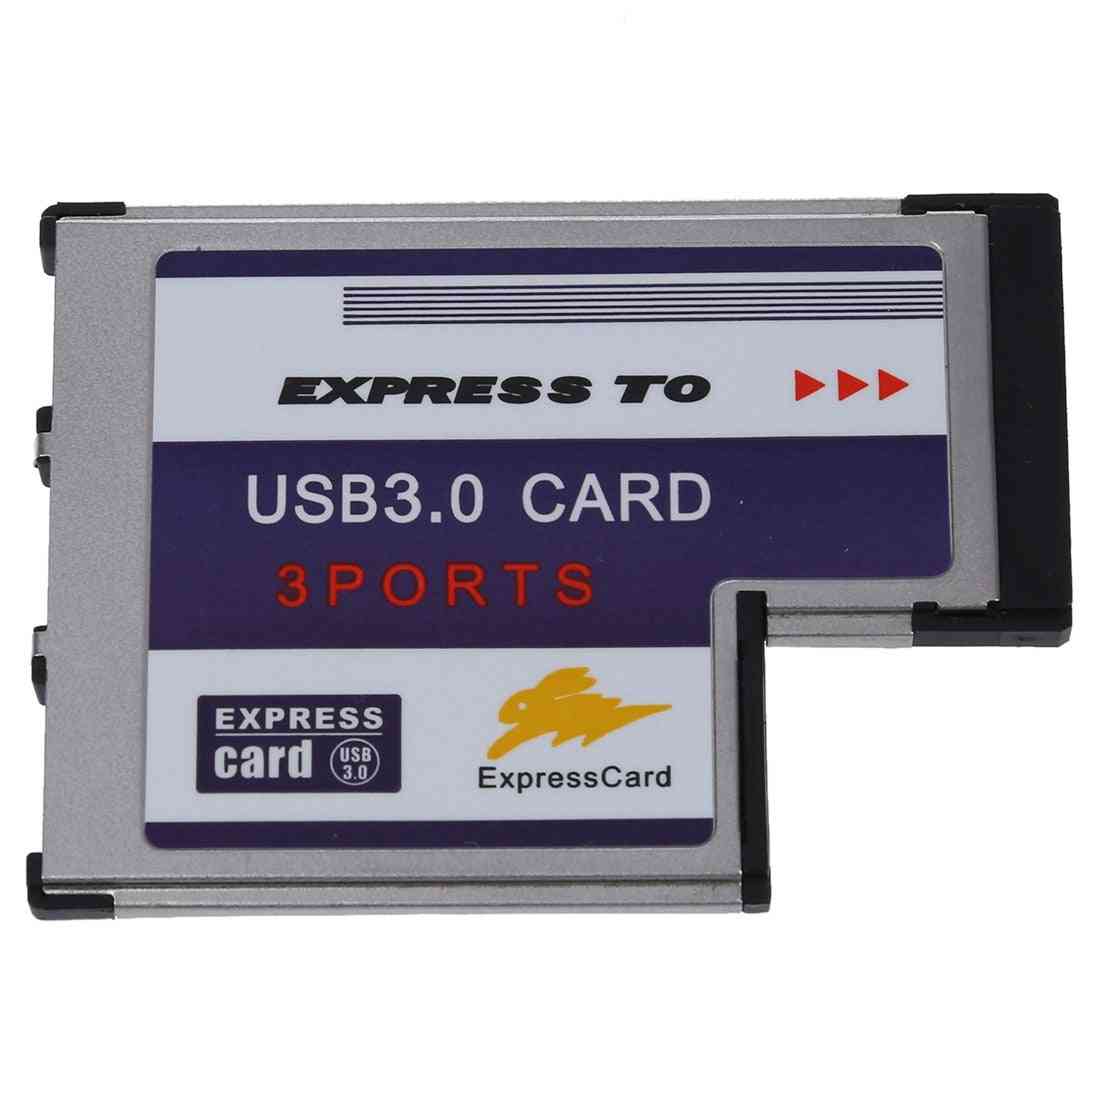 3 Port Usb 3.0 Express Card 54mm Pcmcia For Laptop